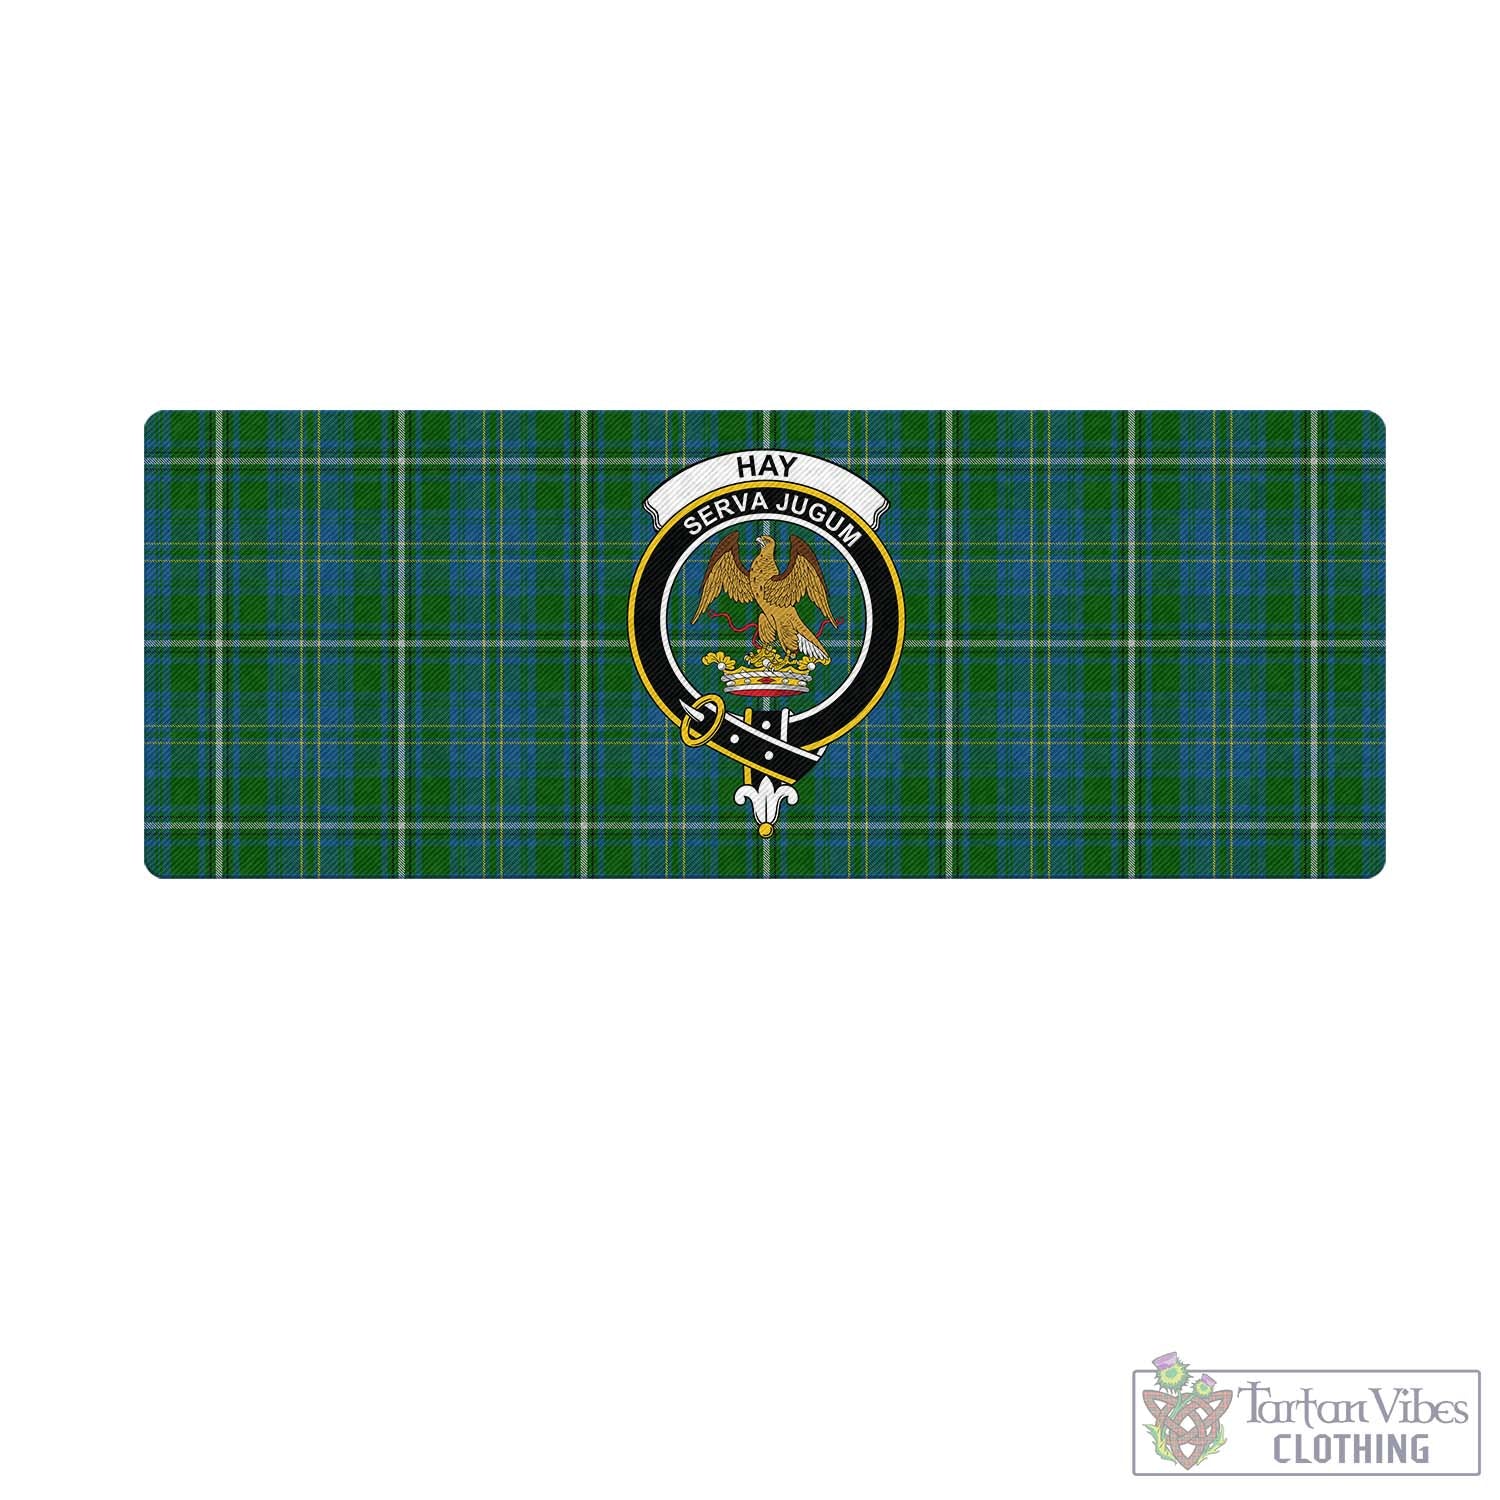 Tartan Vibes Clothing Hay Hunting Tartan Mouse Pad with Family Crest